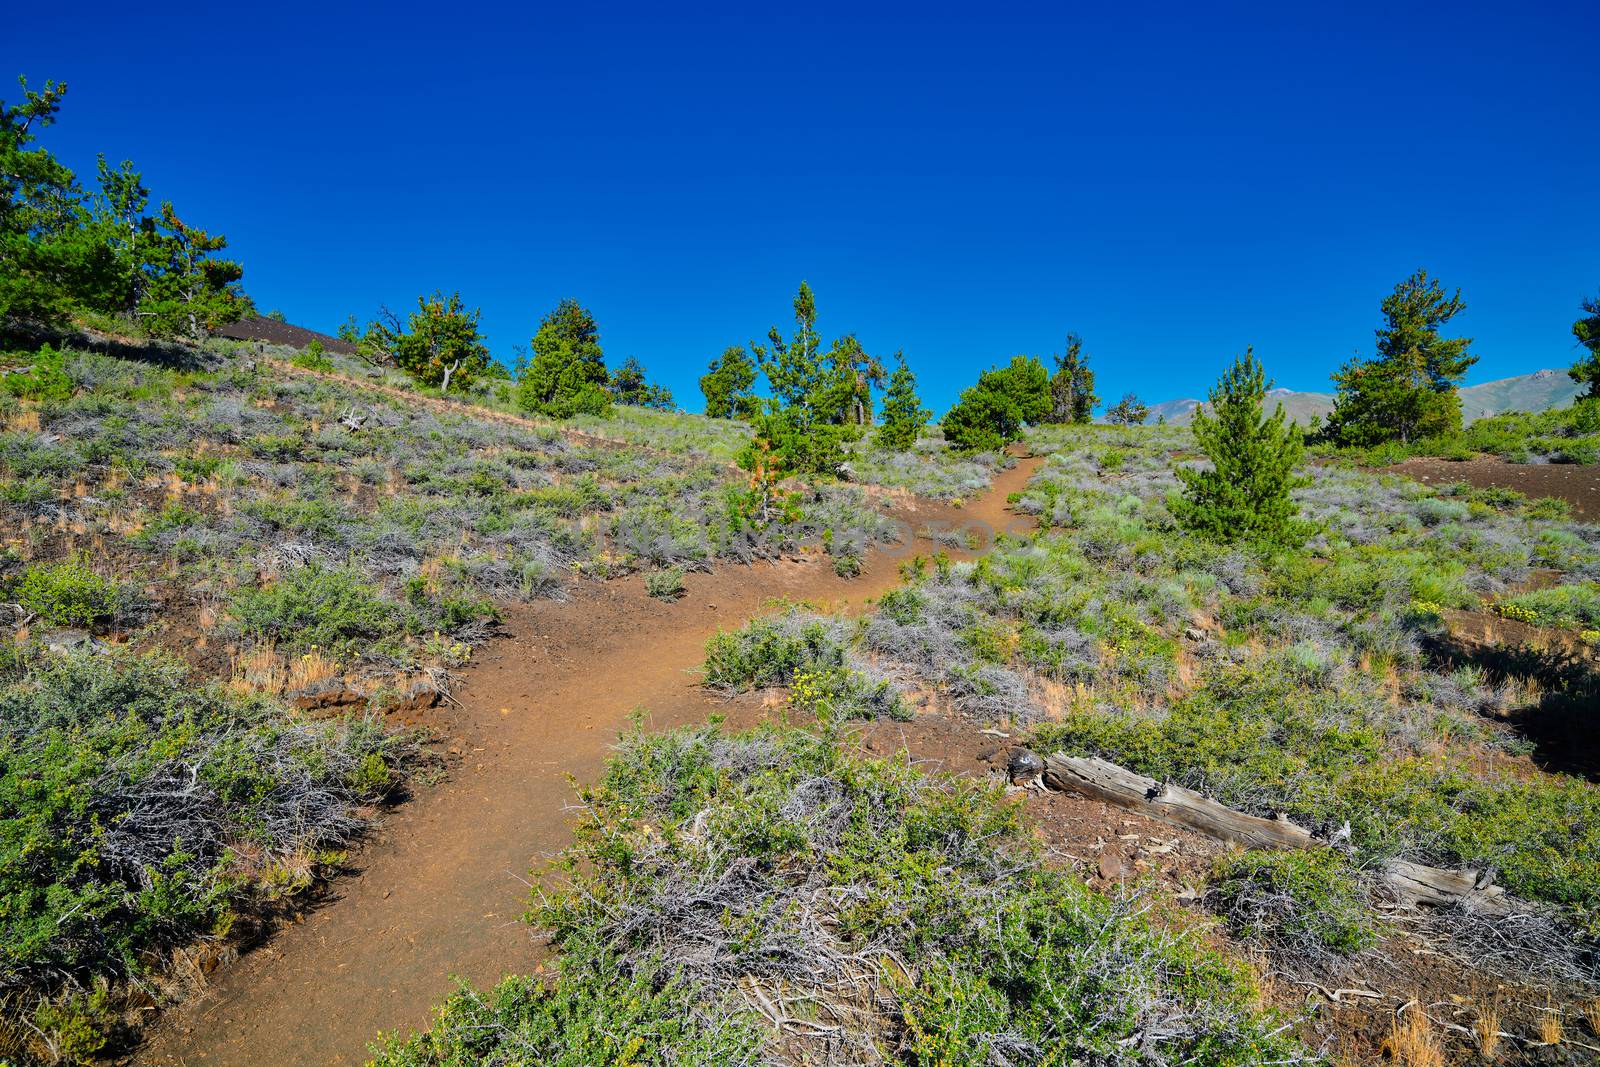 Hiking trail at Craters of the Moon National Park.